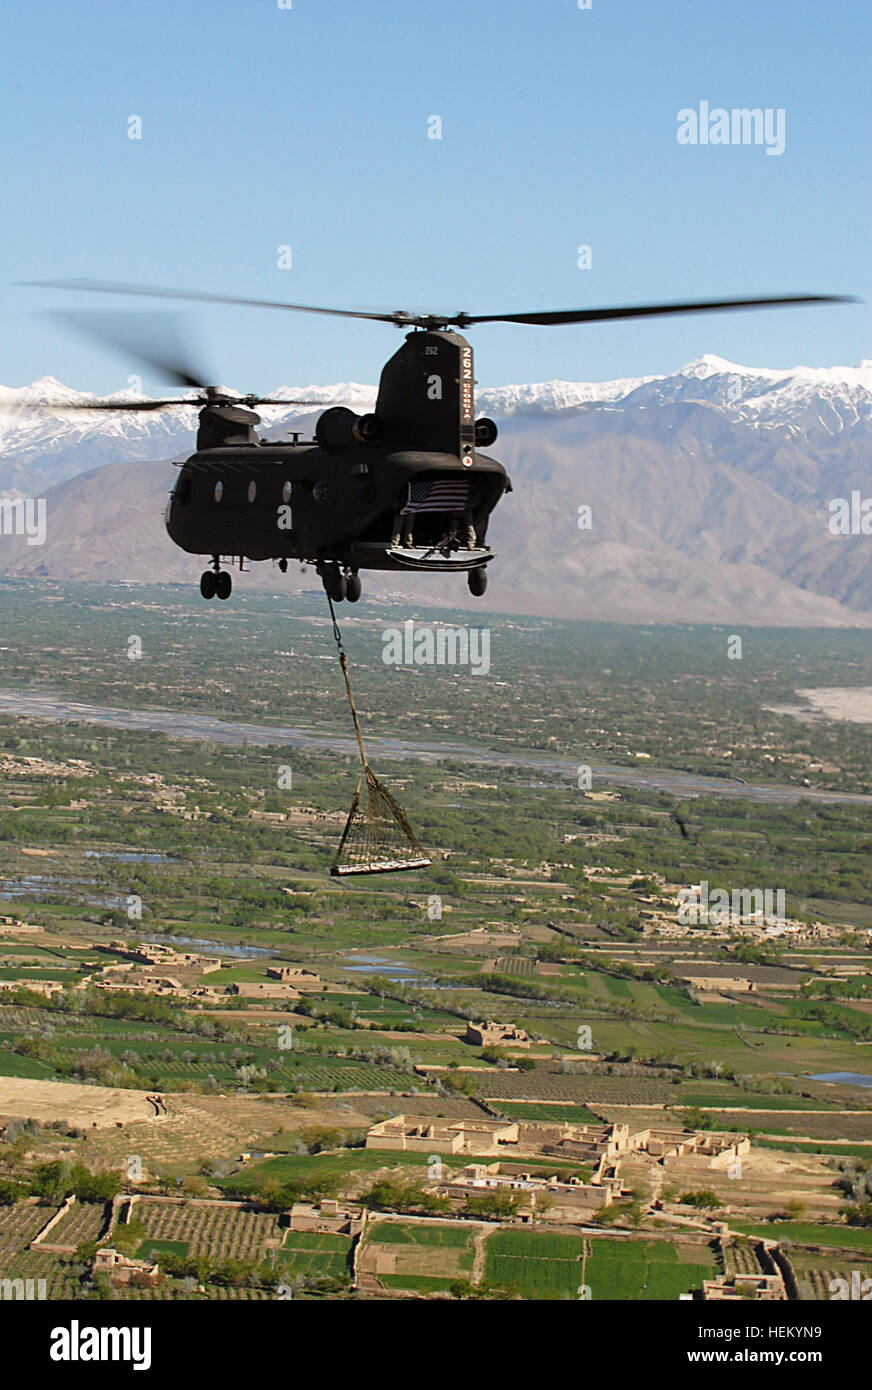 BAGRAM AIRFIELD, Afghanistan —A CH-47 Chinook helicopter flown by aviators from Task Force Falcon carry a sling-loaded I-beam from the World Trade Center and display an American flag above Parwan province, Afghanistan, March 31. The beam, which is nine feet long and two feet wide and weighs more than 950 pounds, was donated to the U.S. military by the residents of Breezy Point, New York through an organization called Sons and Daughters of America, Breezy Point. (Photo by U.S. Army Sgt. Spencer Case, 304th Public Affiars Detachment) A Fitting Tribute, Word Trade Center I-Beam Finds Home in Afgh Stock Photo